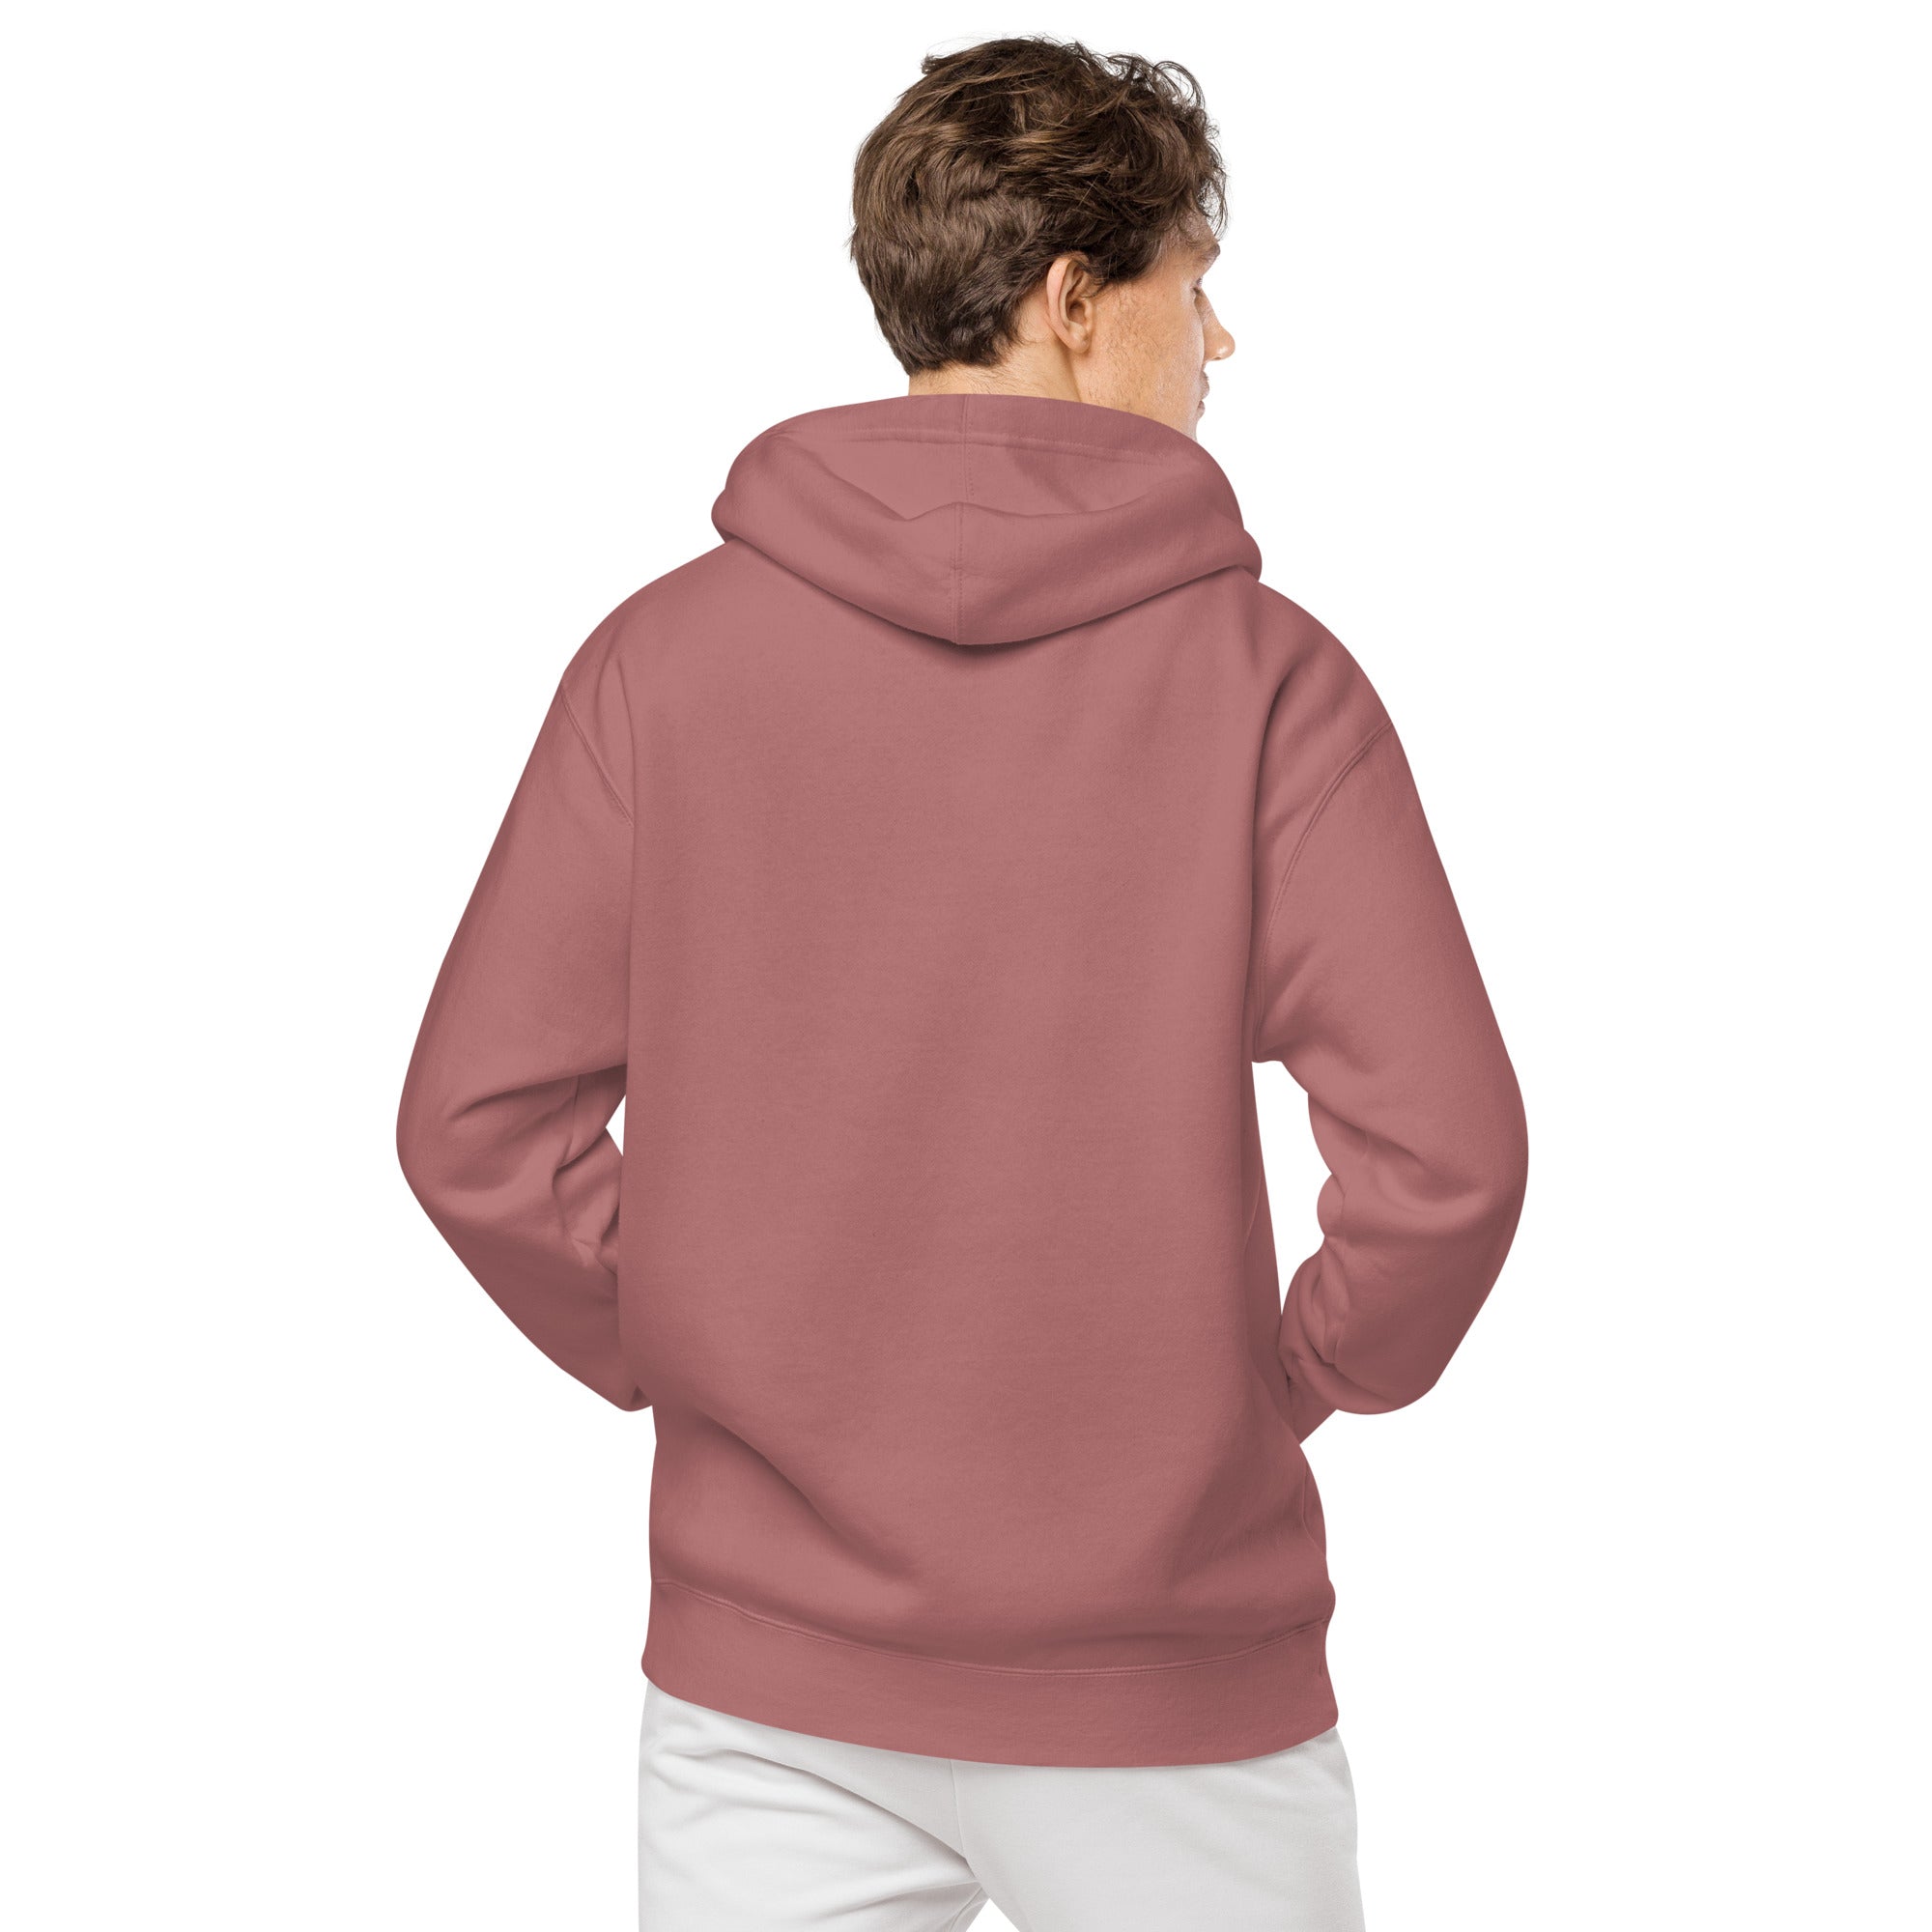 unisex-pigment-dyed-hoodie-pigment-maroon-back-652f0f6a1ea01.jpg